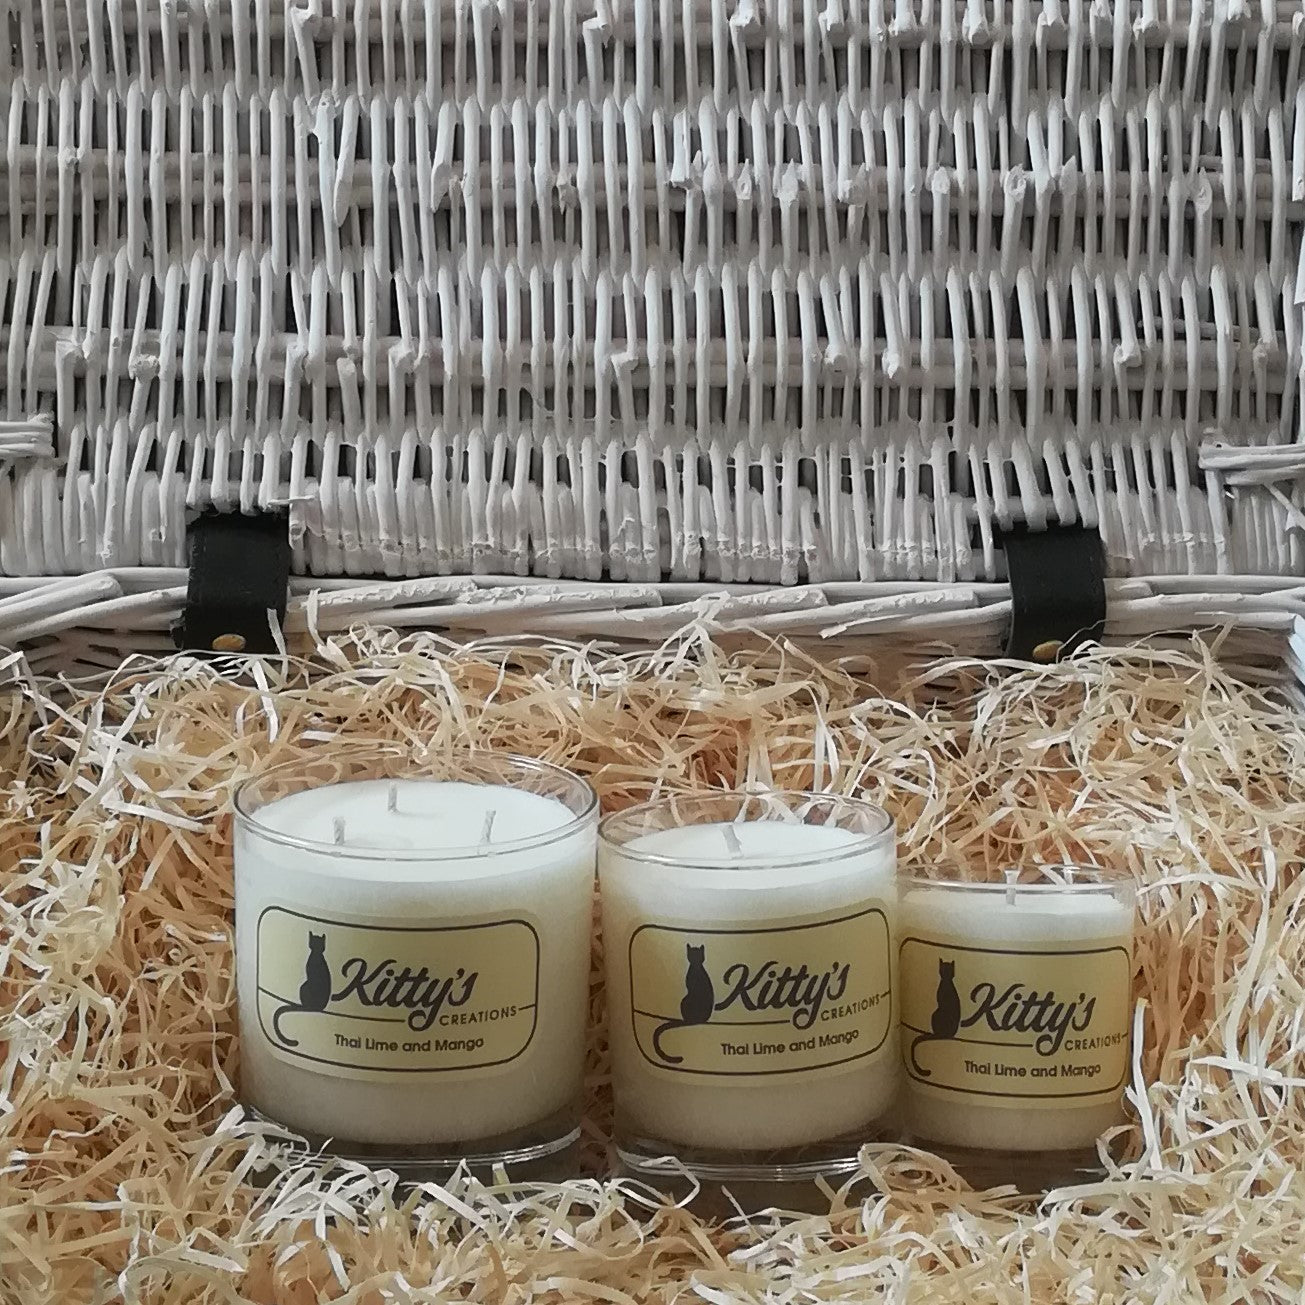 Three glass tumblers, one large, one medium, and one smaller are filled with soy wax, pictured in a basket of straw. These candles are the perfect gift. Each reveals a scent which is a vibrant mix of aromas, taking you back to those warm humid days and the sounds of night-time crickets on the trip you will never forget.